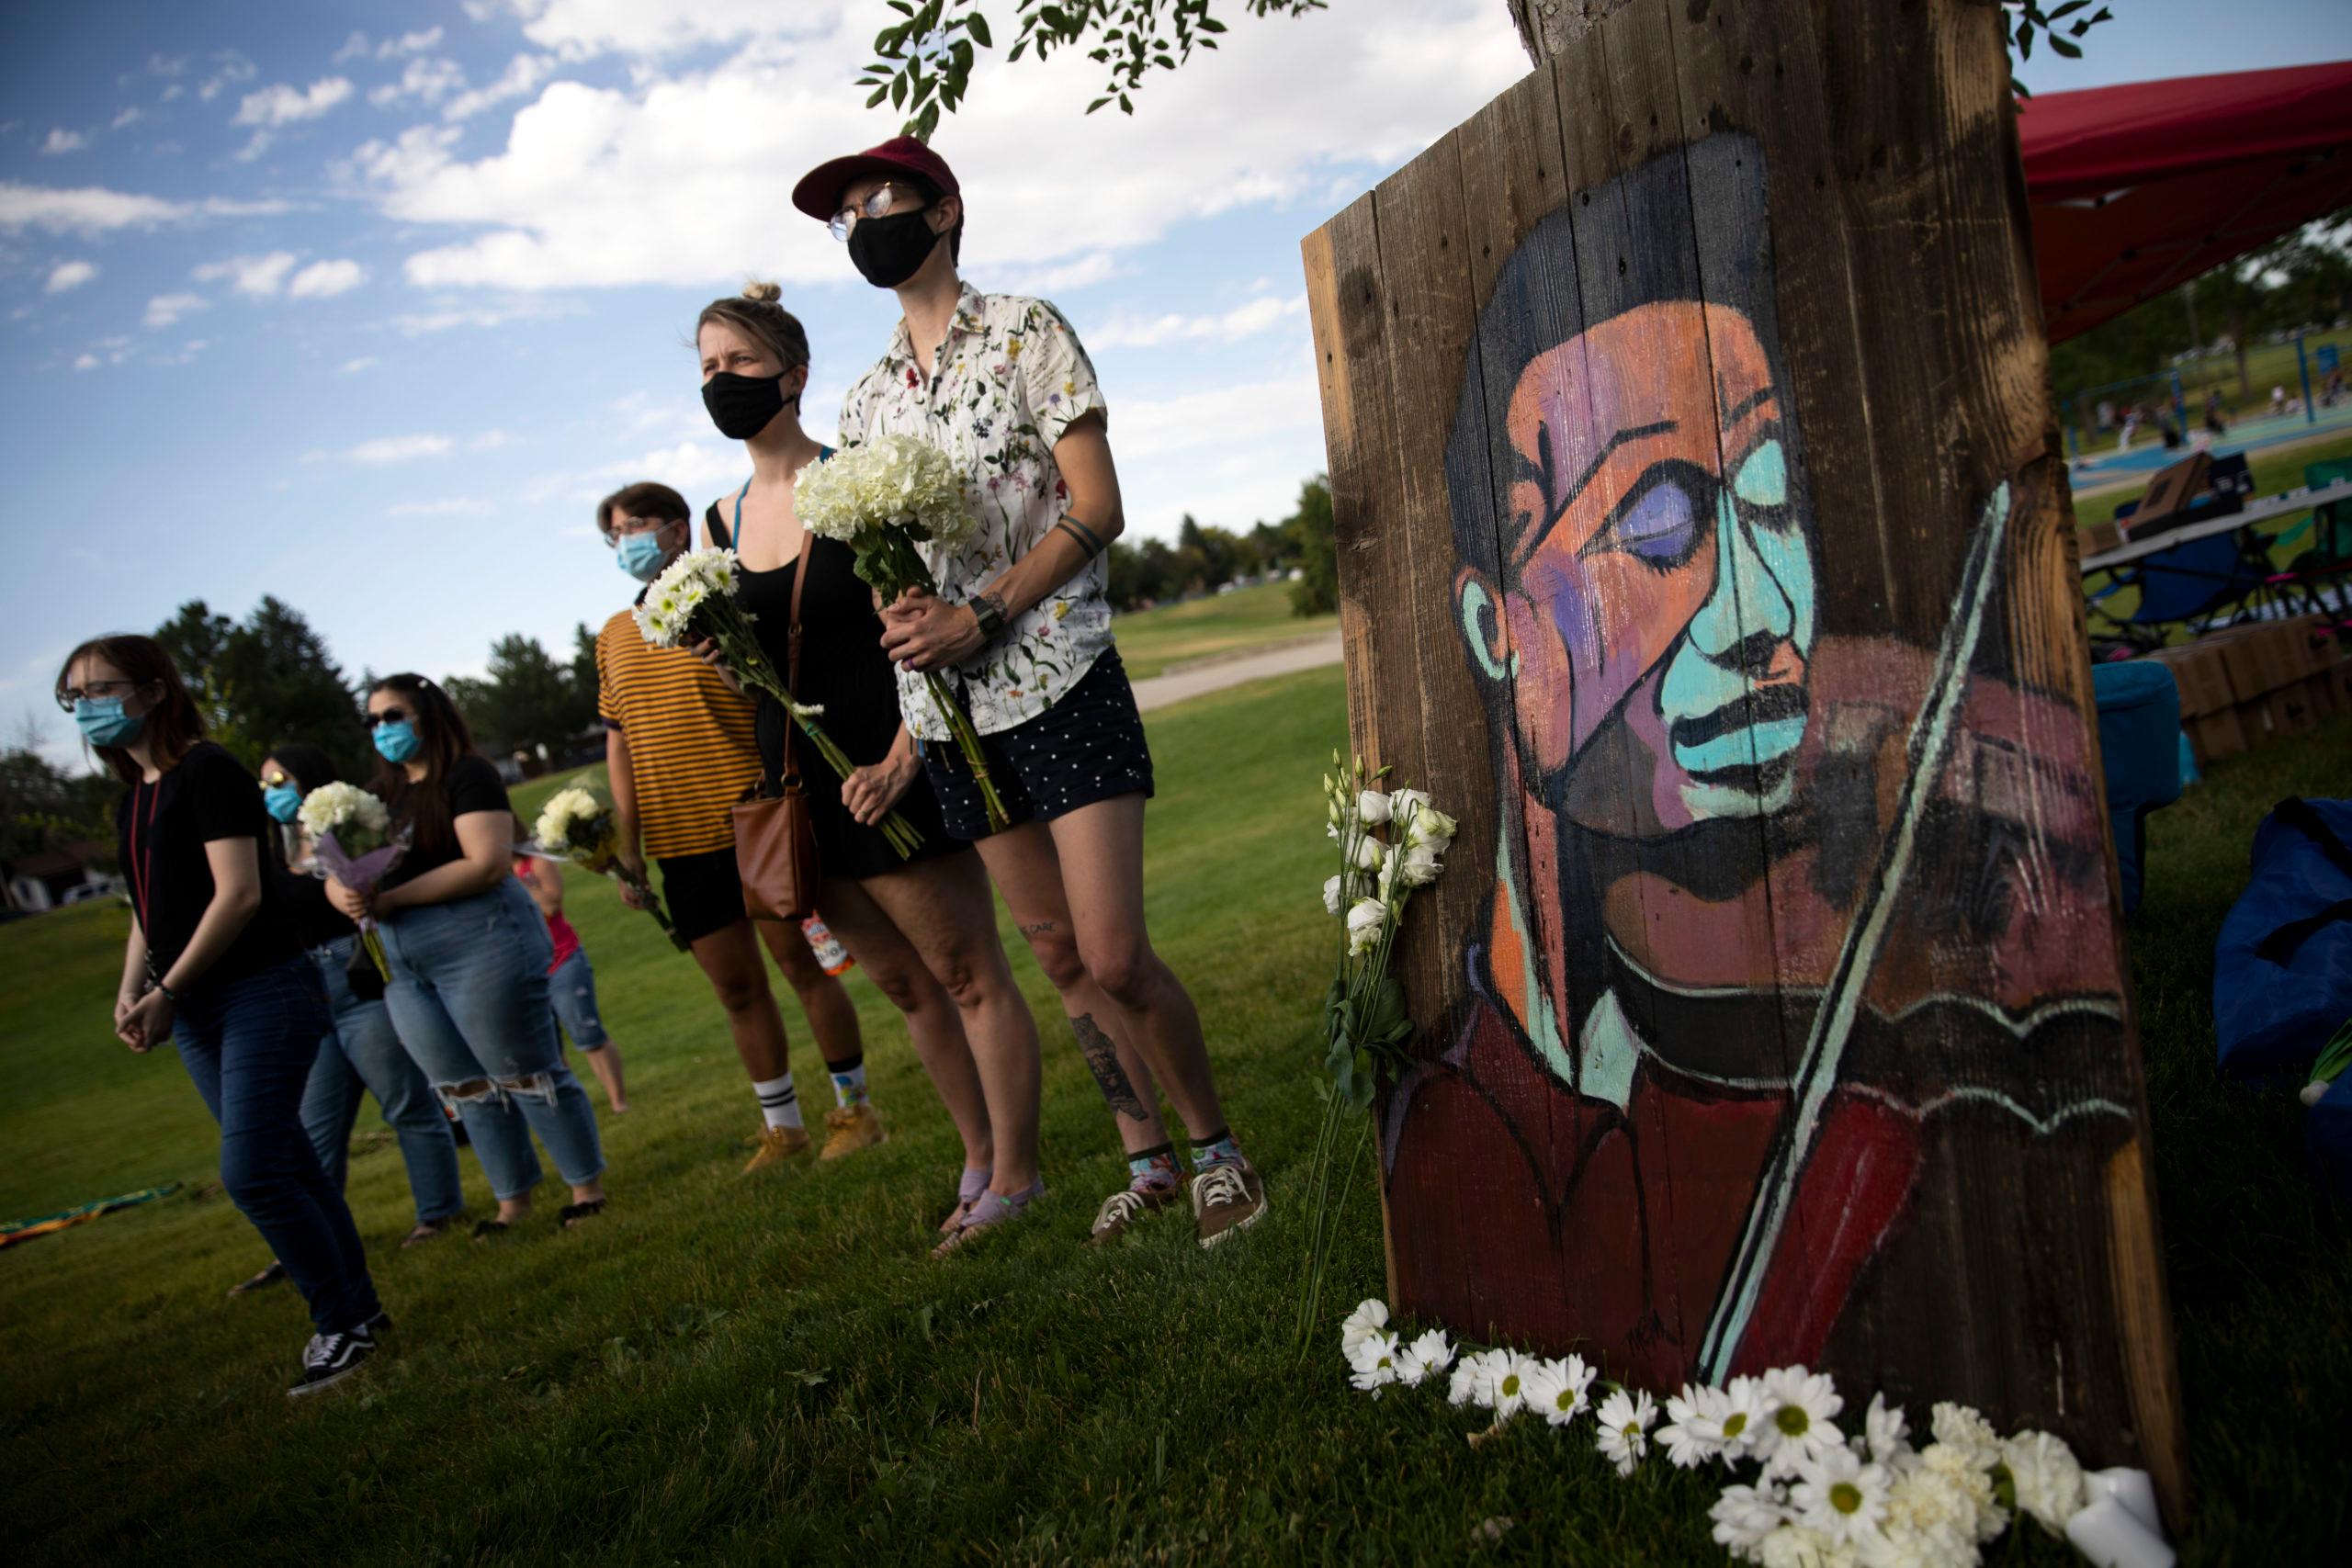 A flower and candlelight vigil for Elijah McClain in Aurora on July 11, 2020